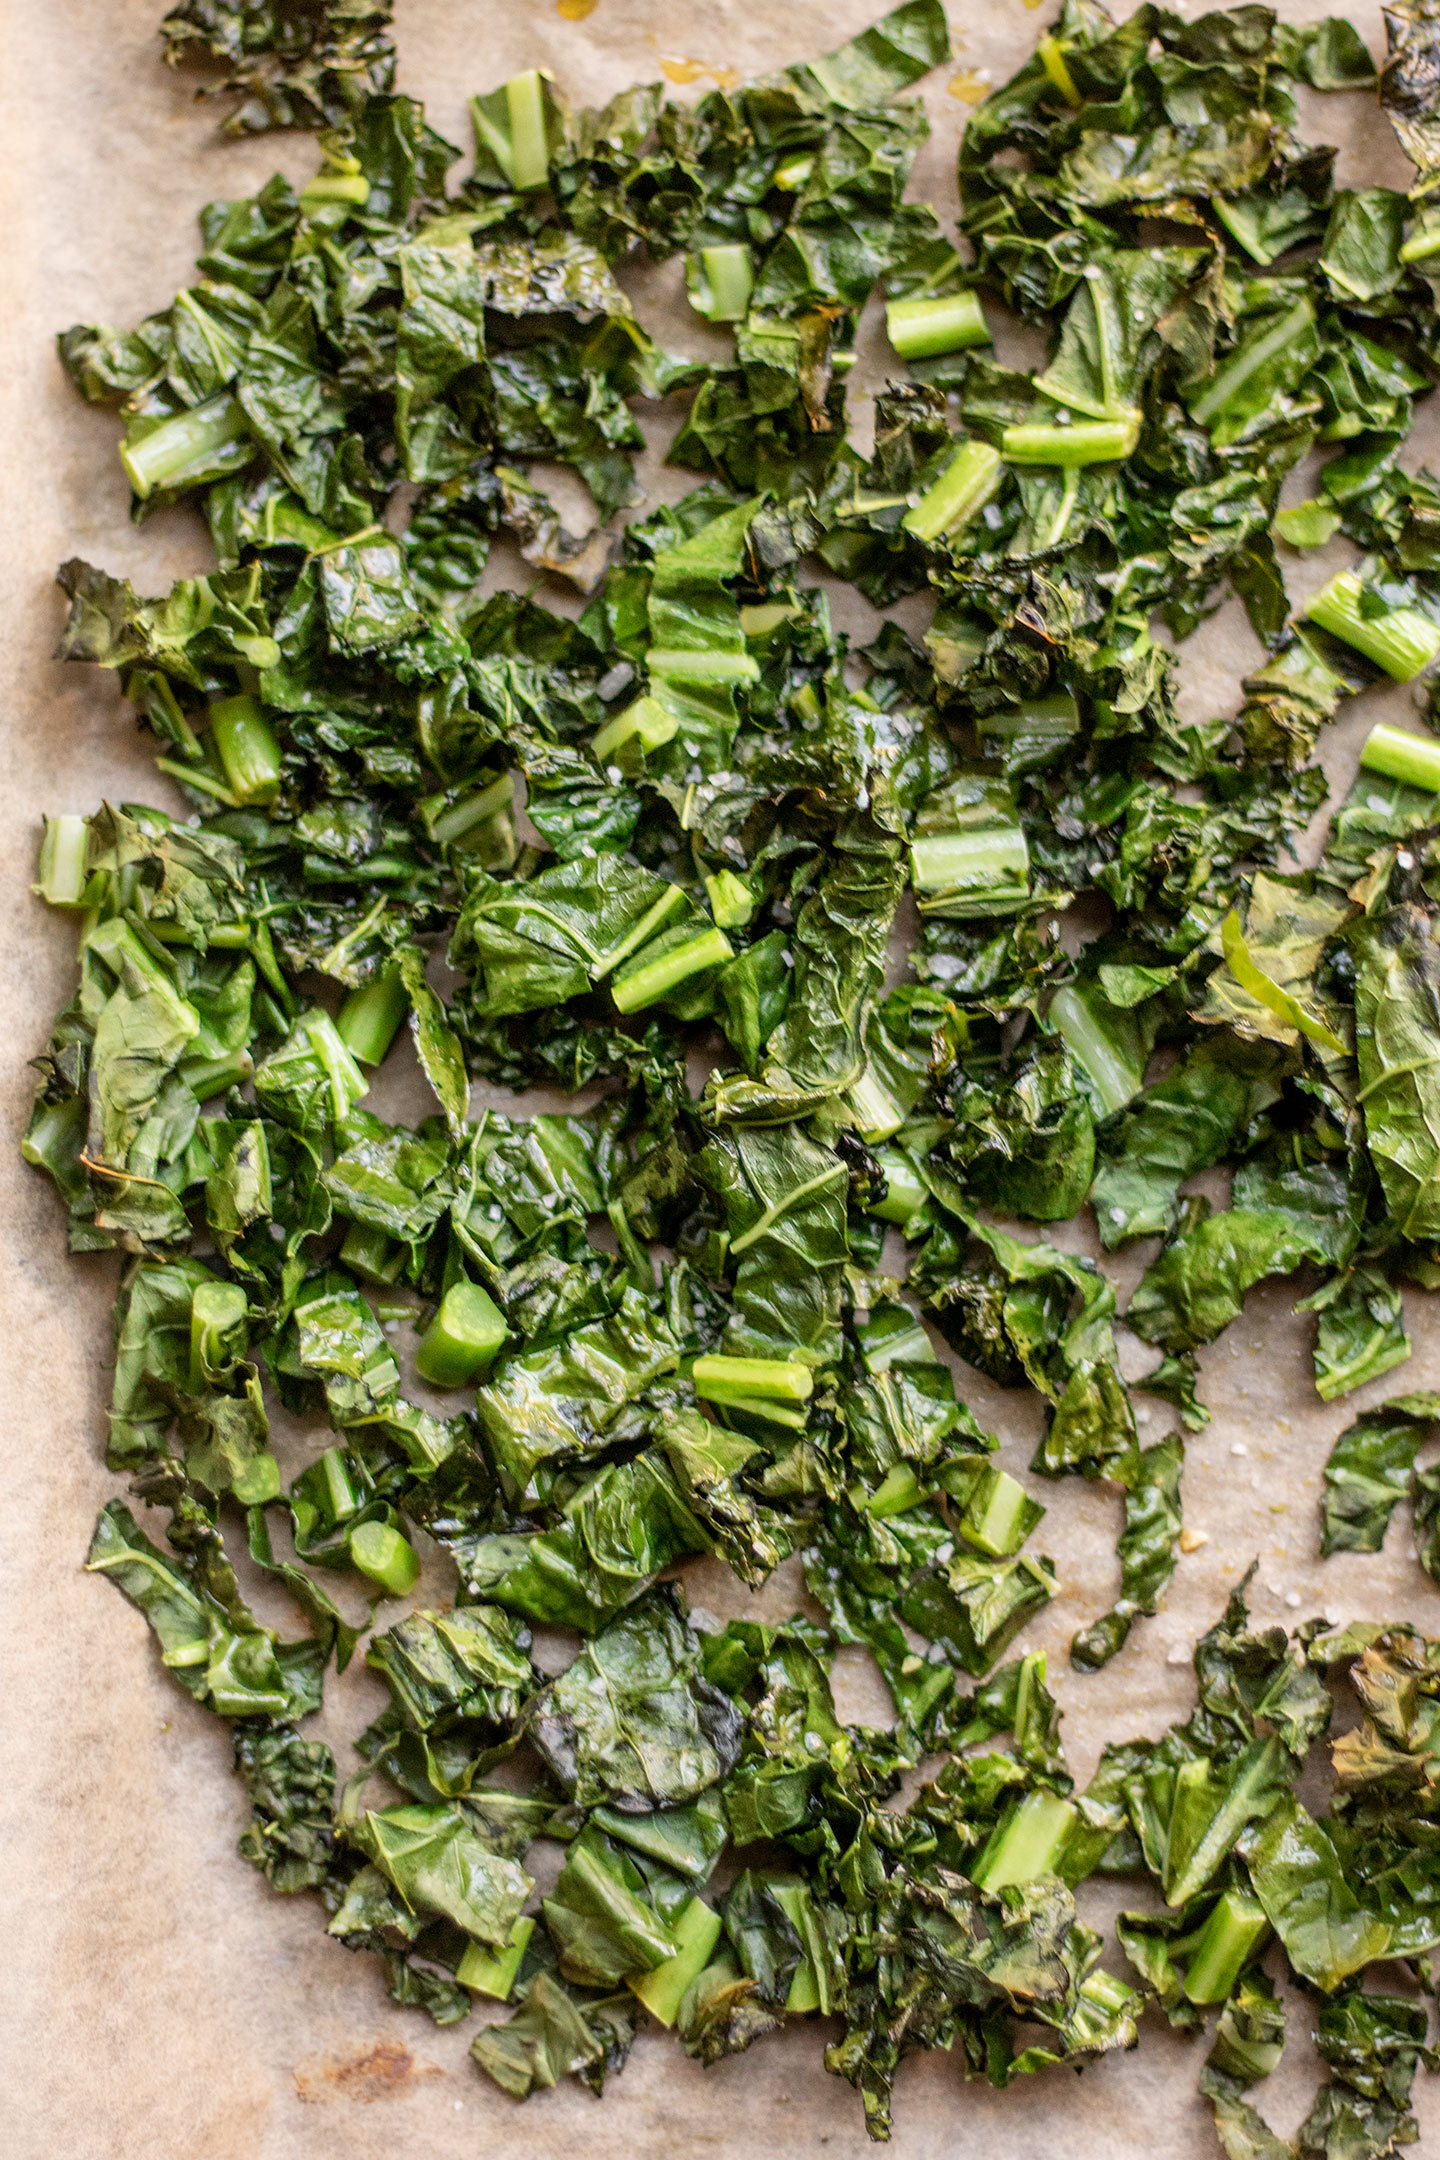 Roughly chopped kale on a baking tray.